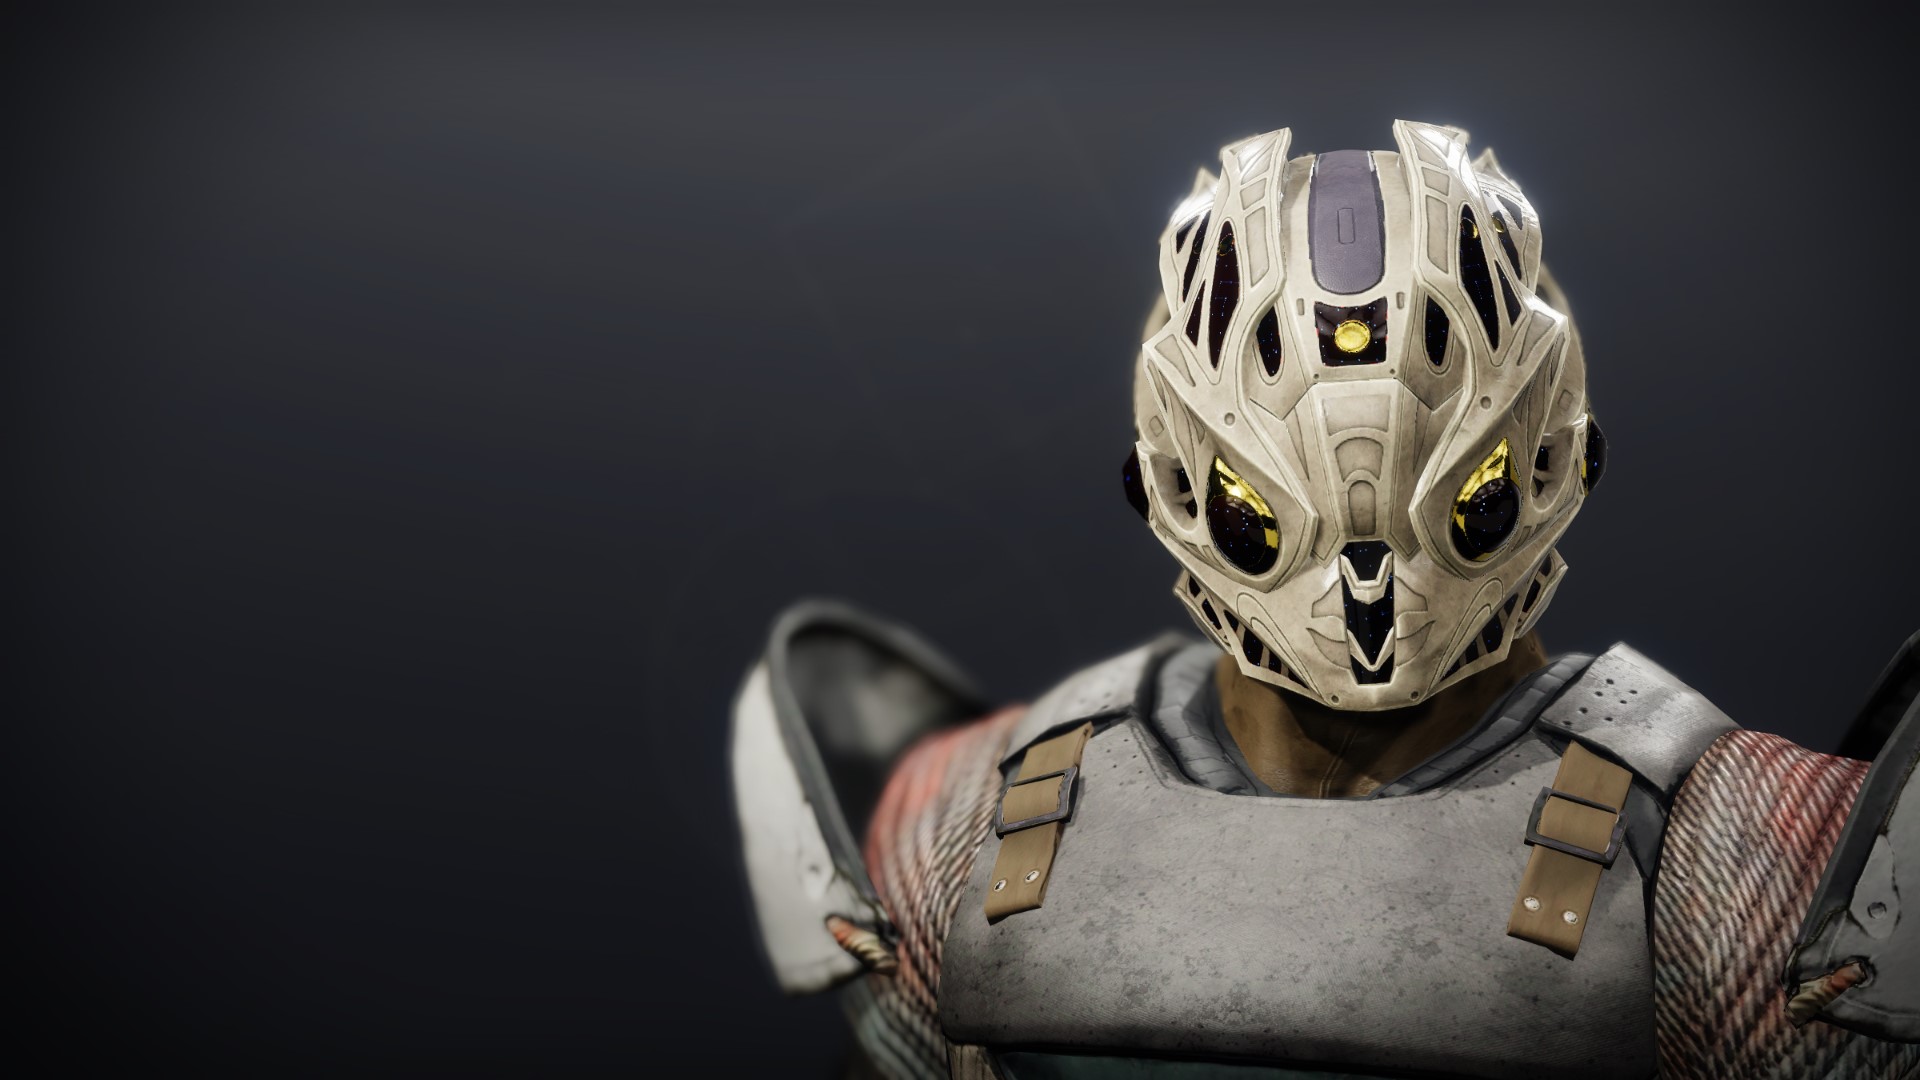 Helm of the Falling Comet armor Ornament